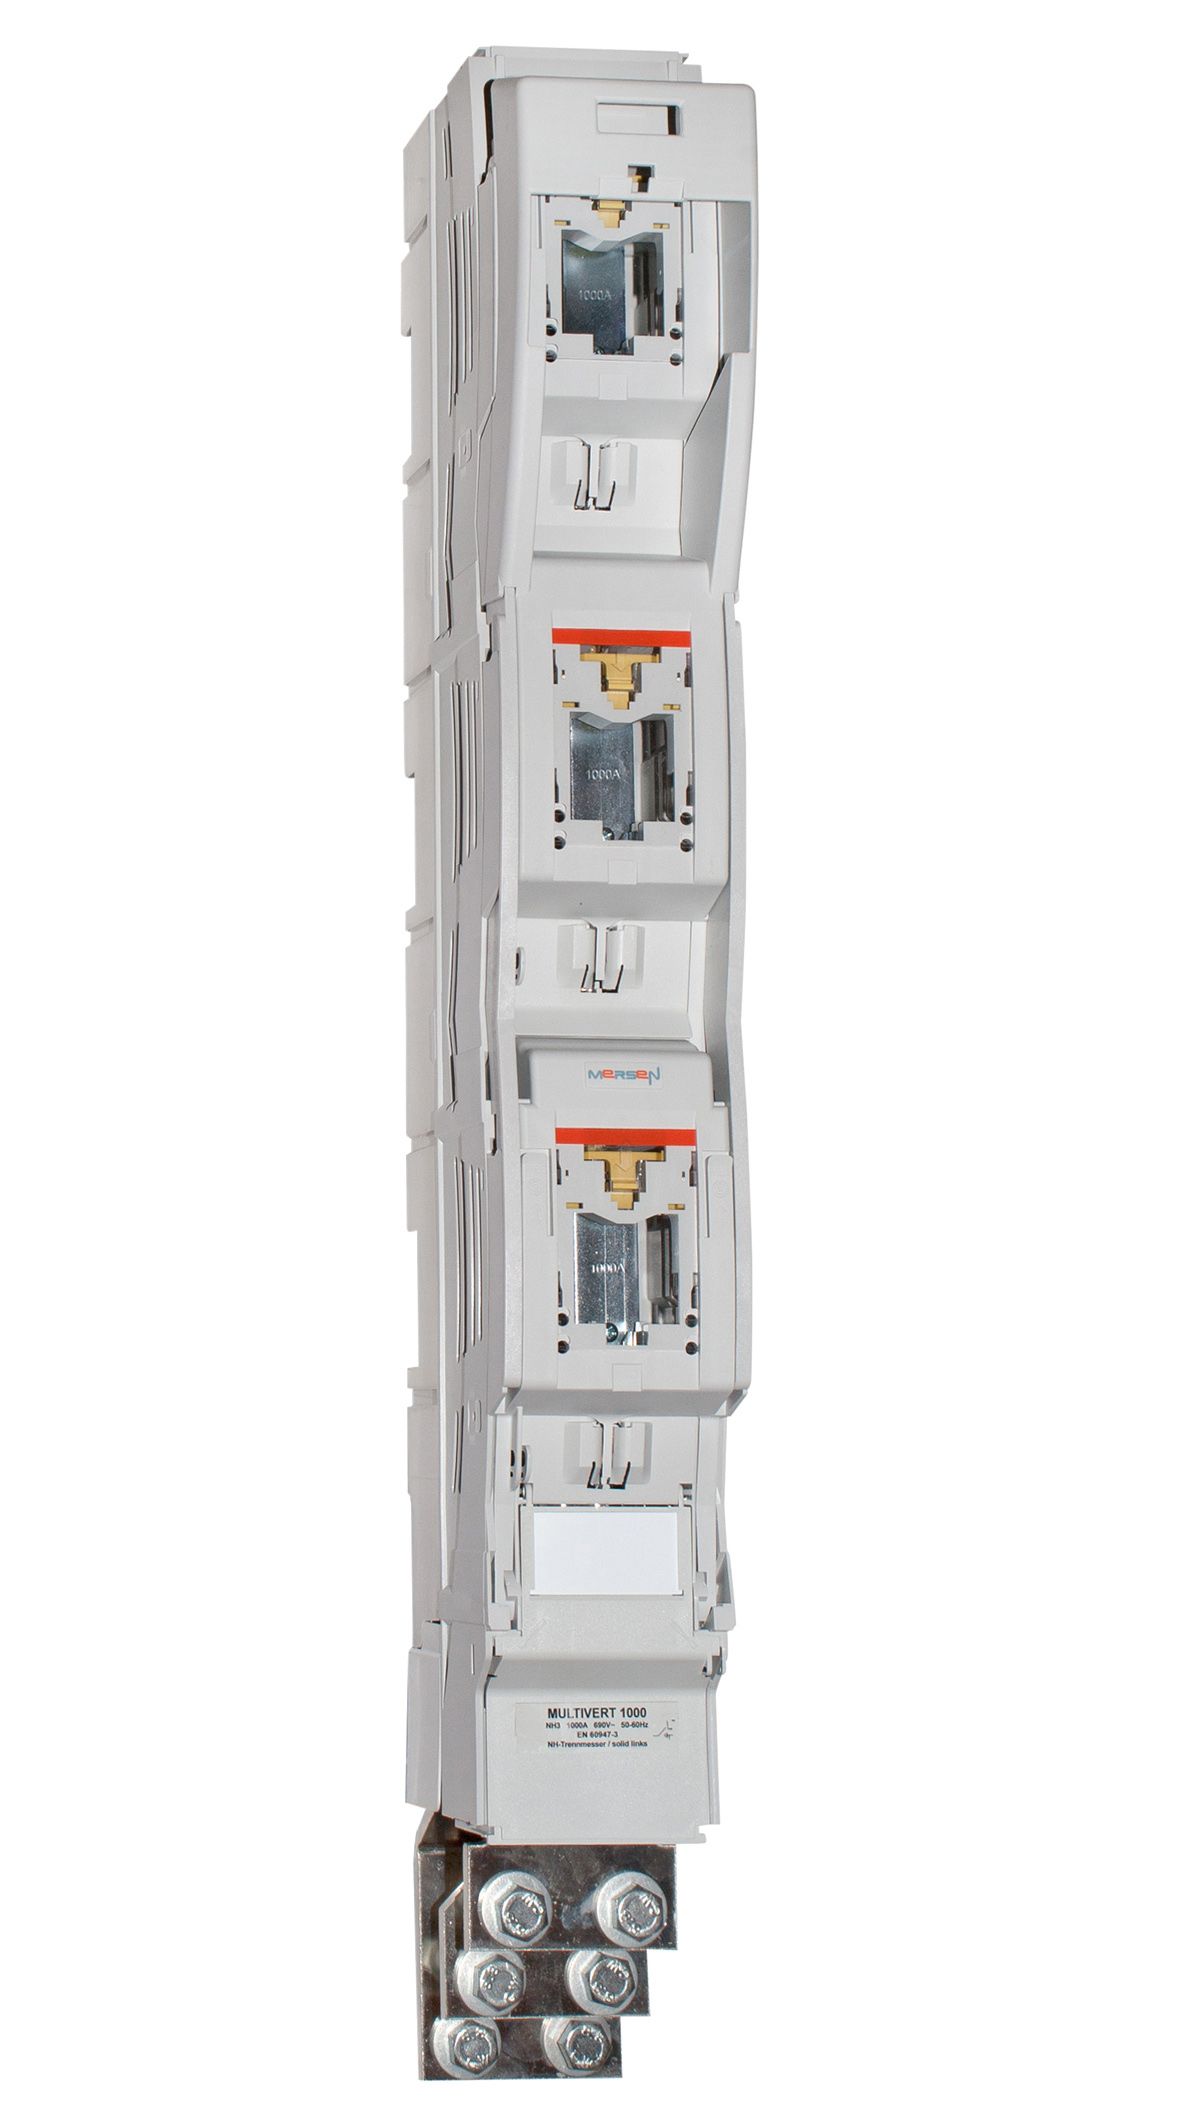 P1023122 - MULTIVERT 1000A, triple pole switching main incomer, multiple termination